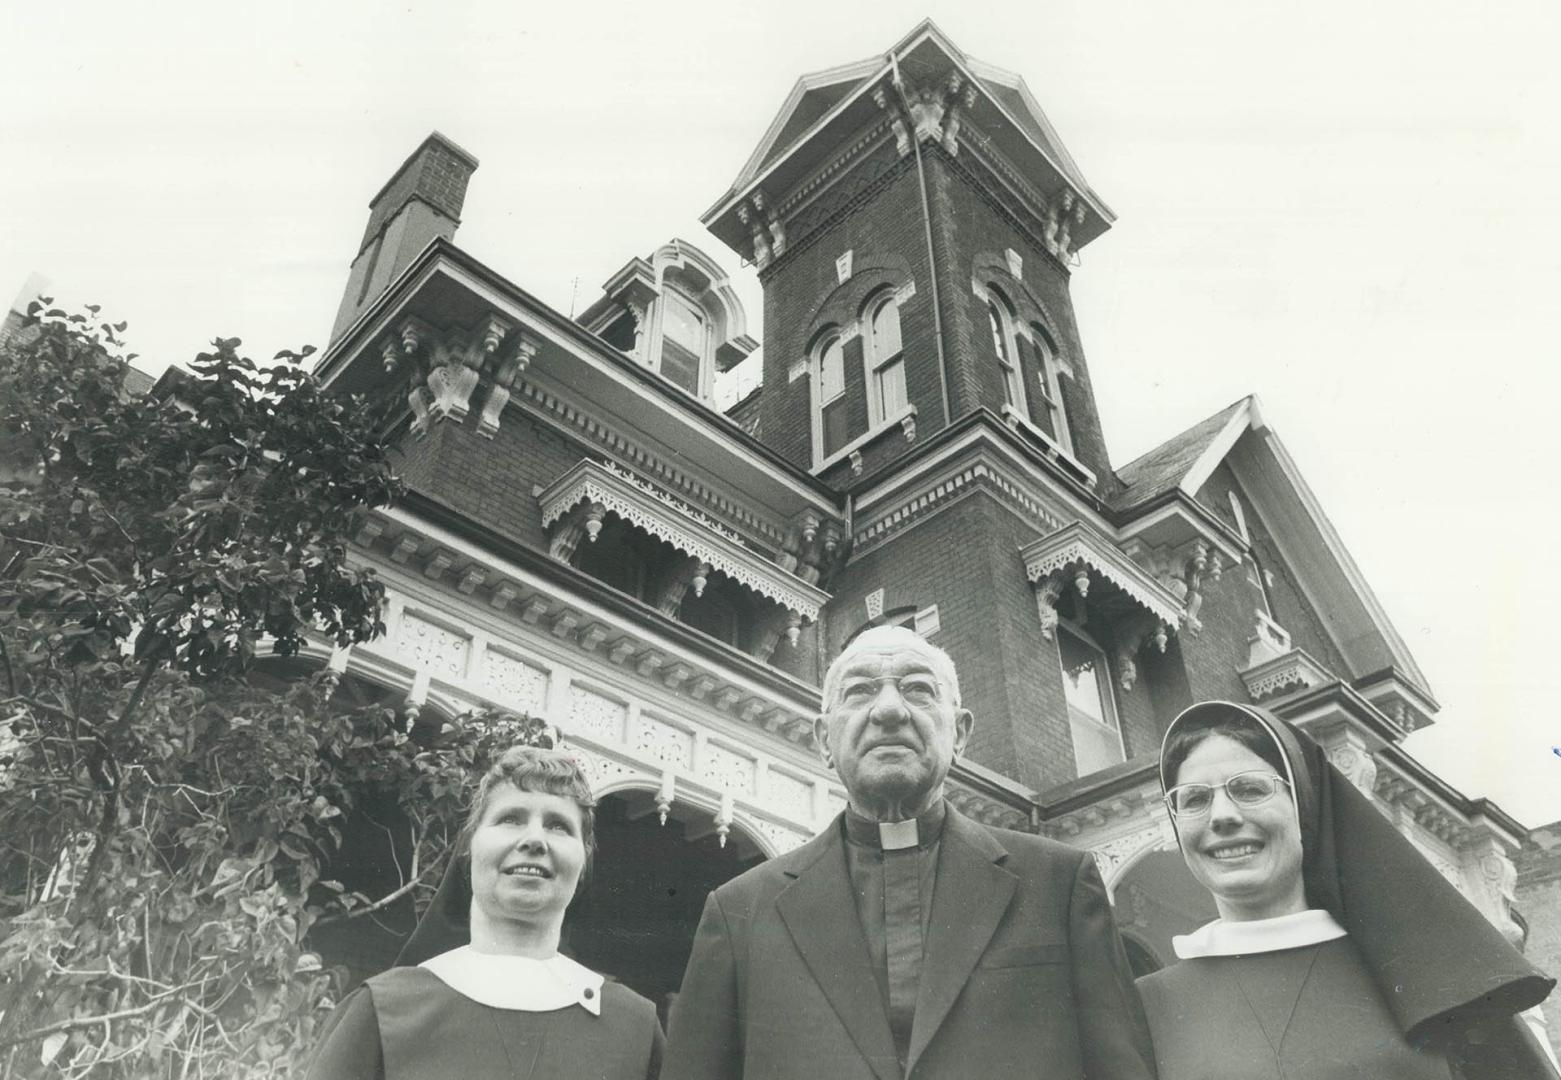 Sisters Alice (left) and Ildephonse with Father Puchniak in front of the Polish Felician Sister's Home